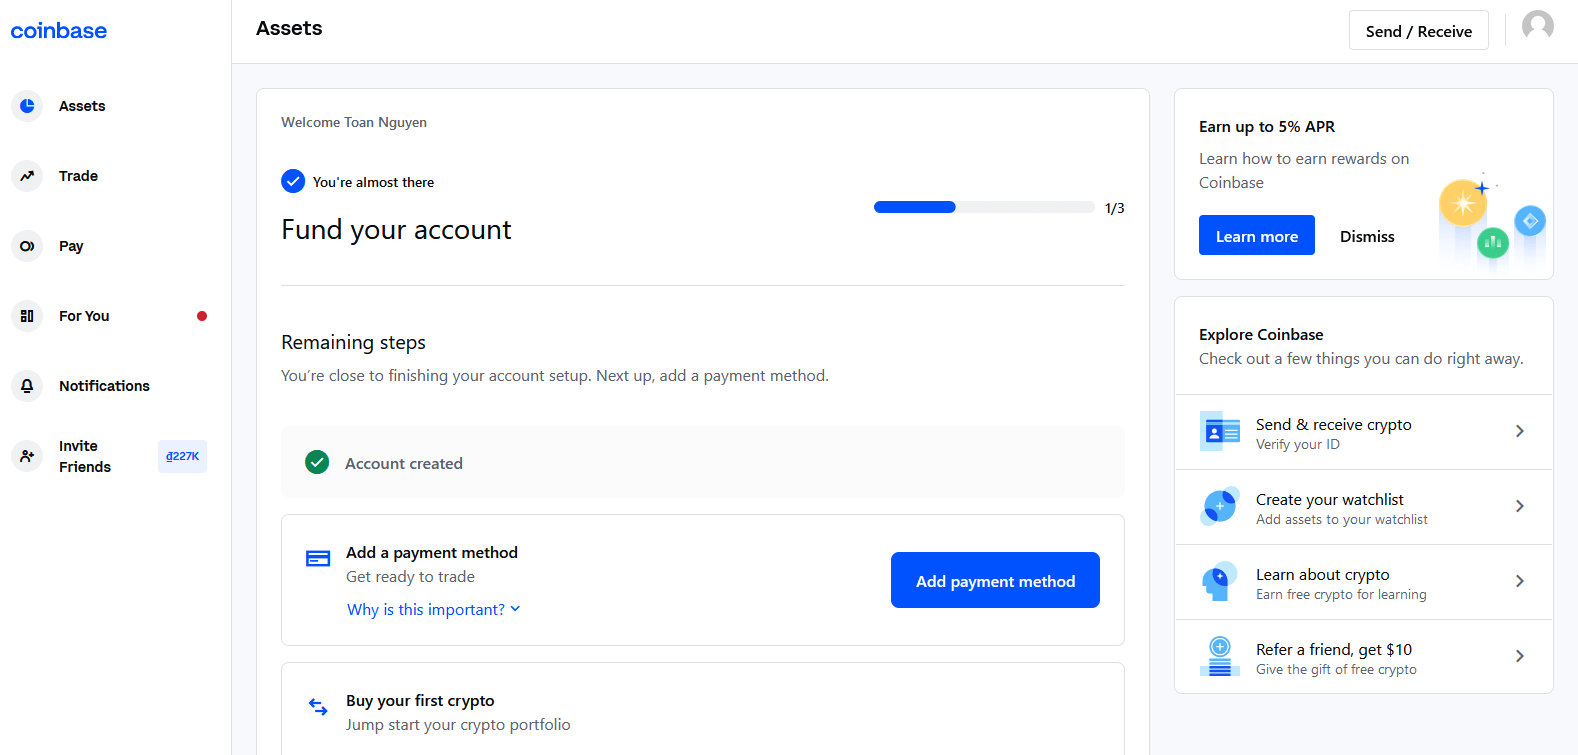 How to Open Account and Sign in to Coinbase